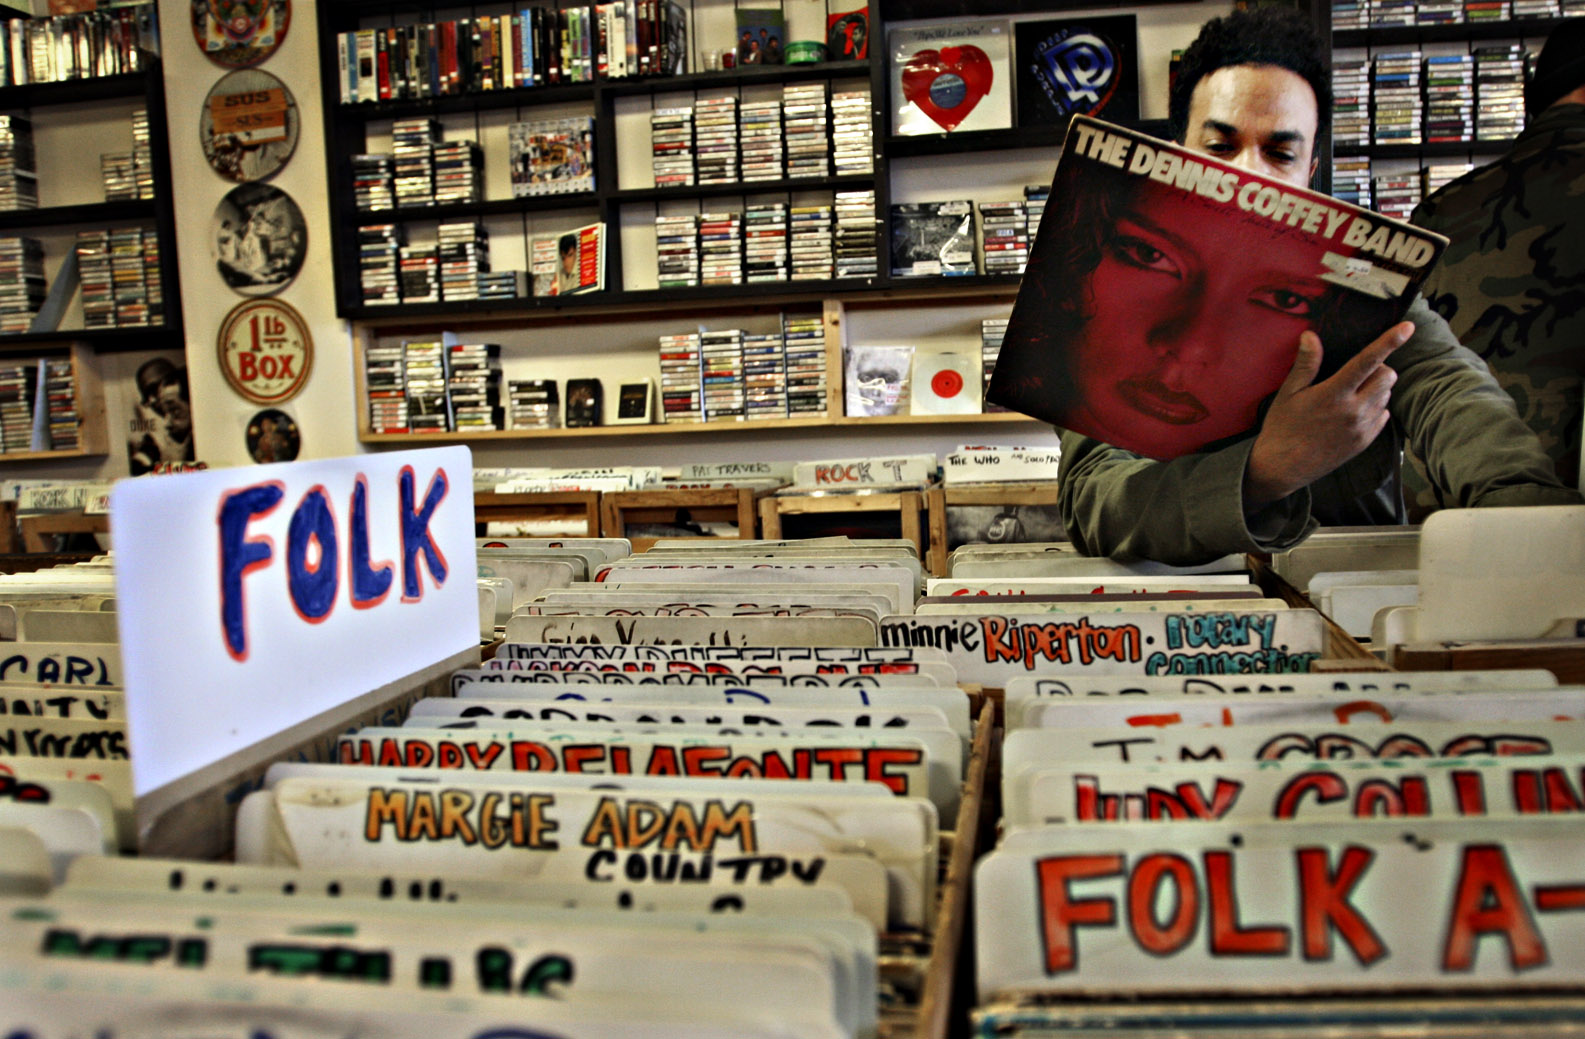 A customer looks at a folk record in a record store